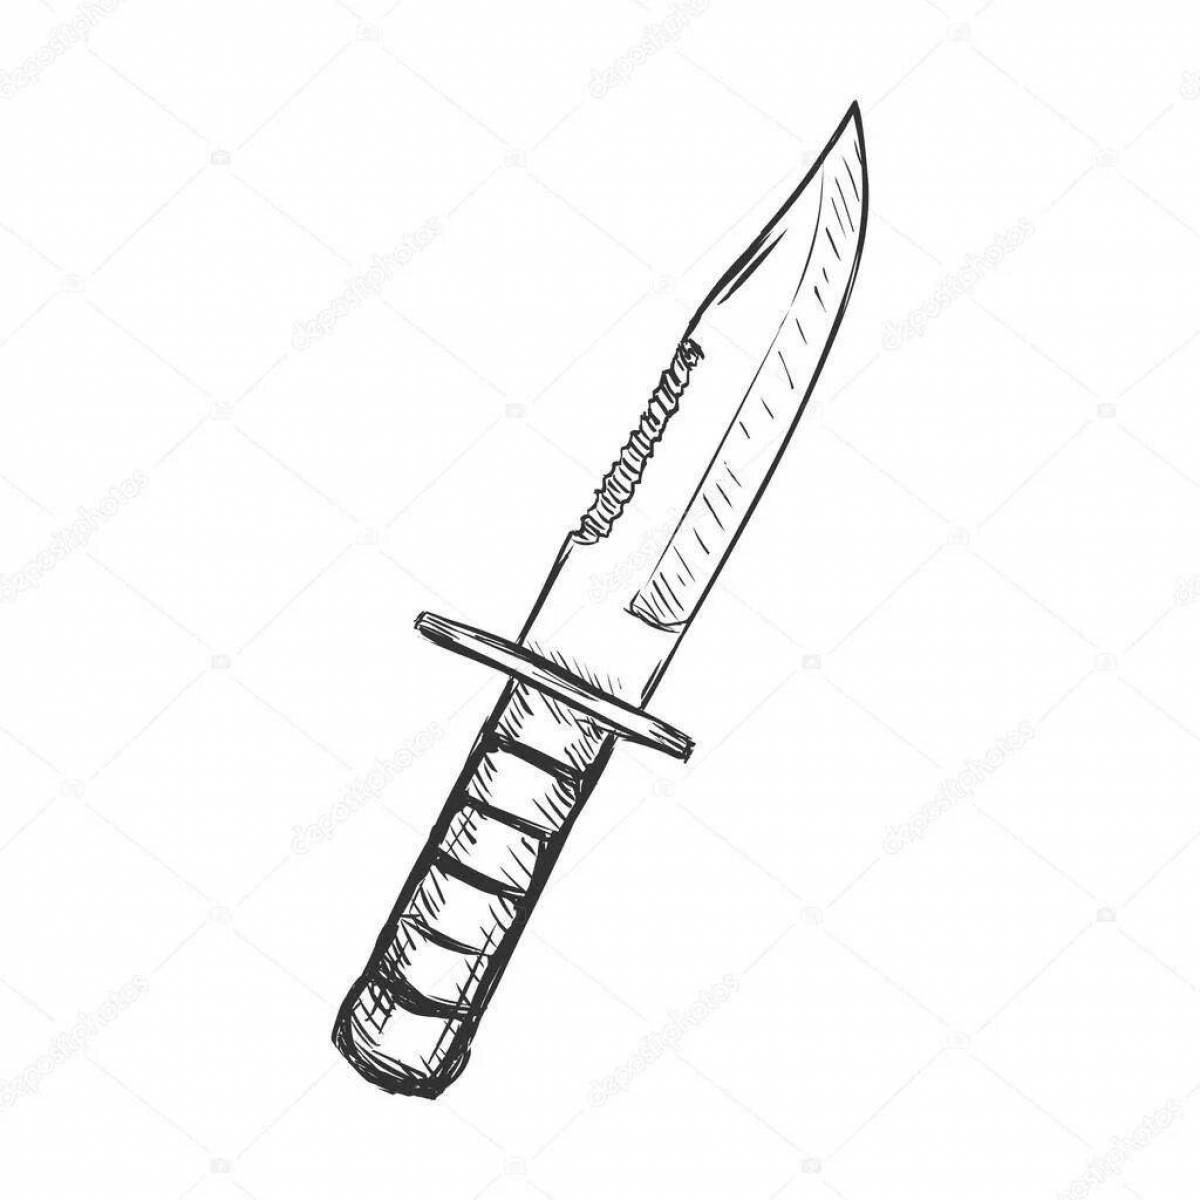 Knife m9 from standoff 2 #11